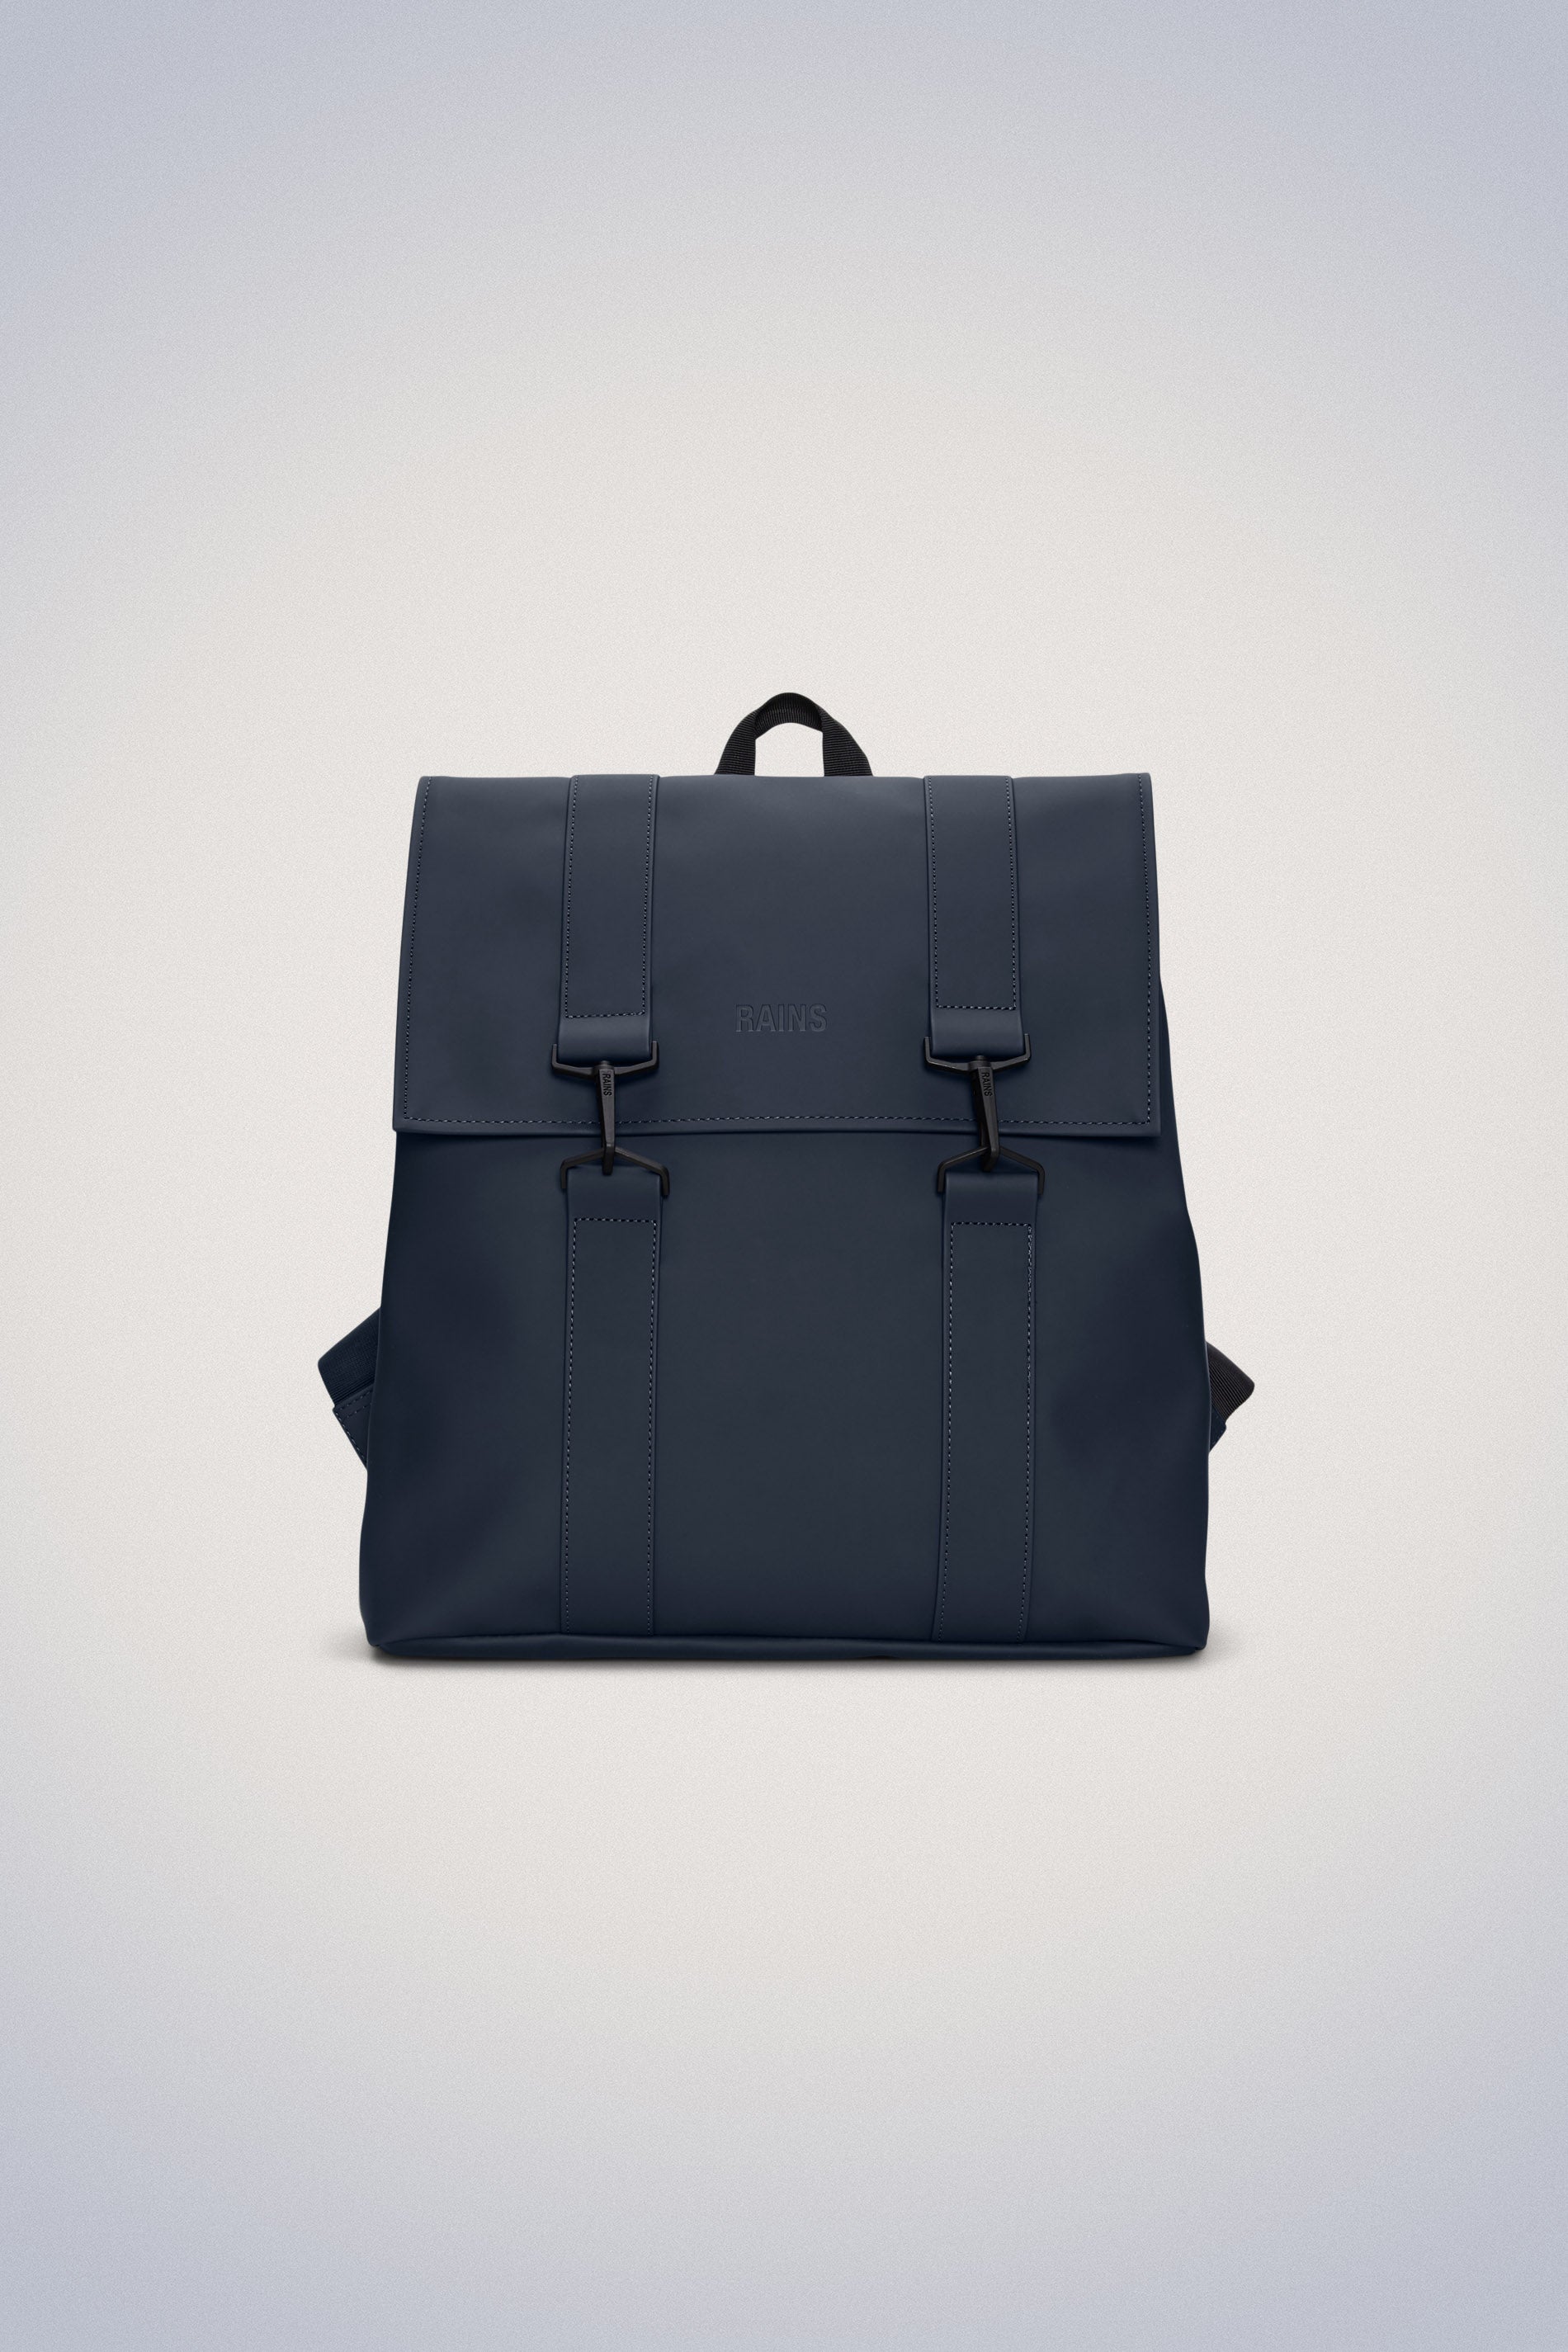 Rains® MSN Bag in Navy for $110 | Free Shipping